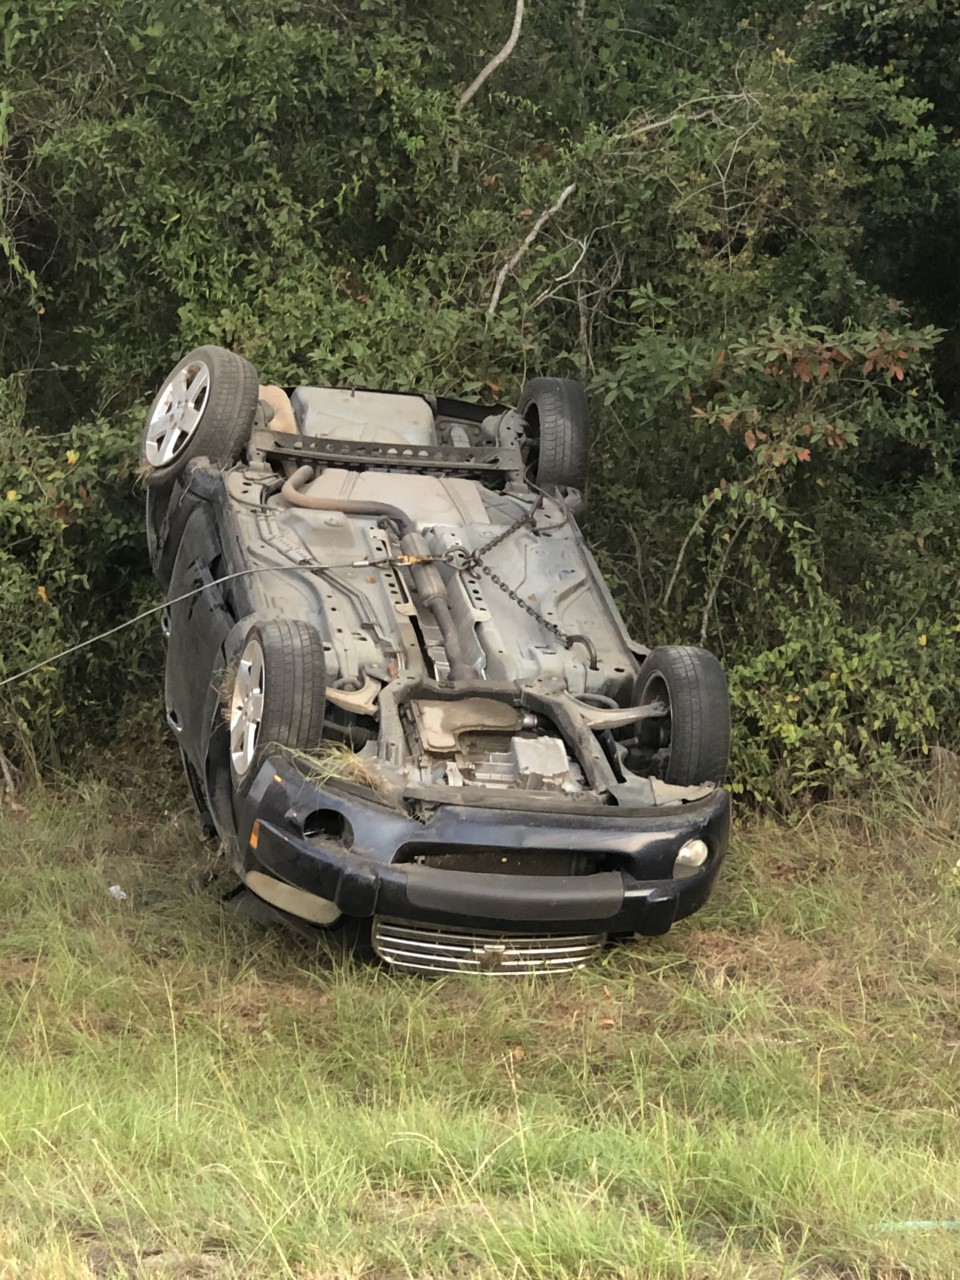 Hwy 84 Accident